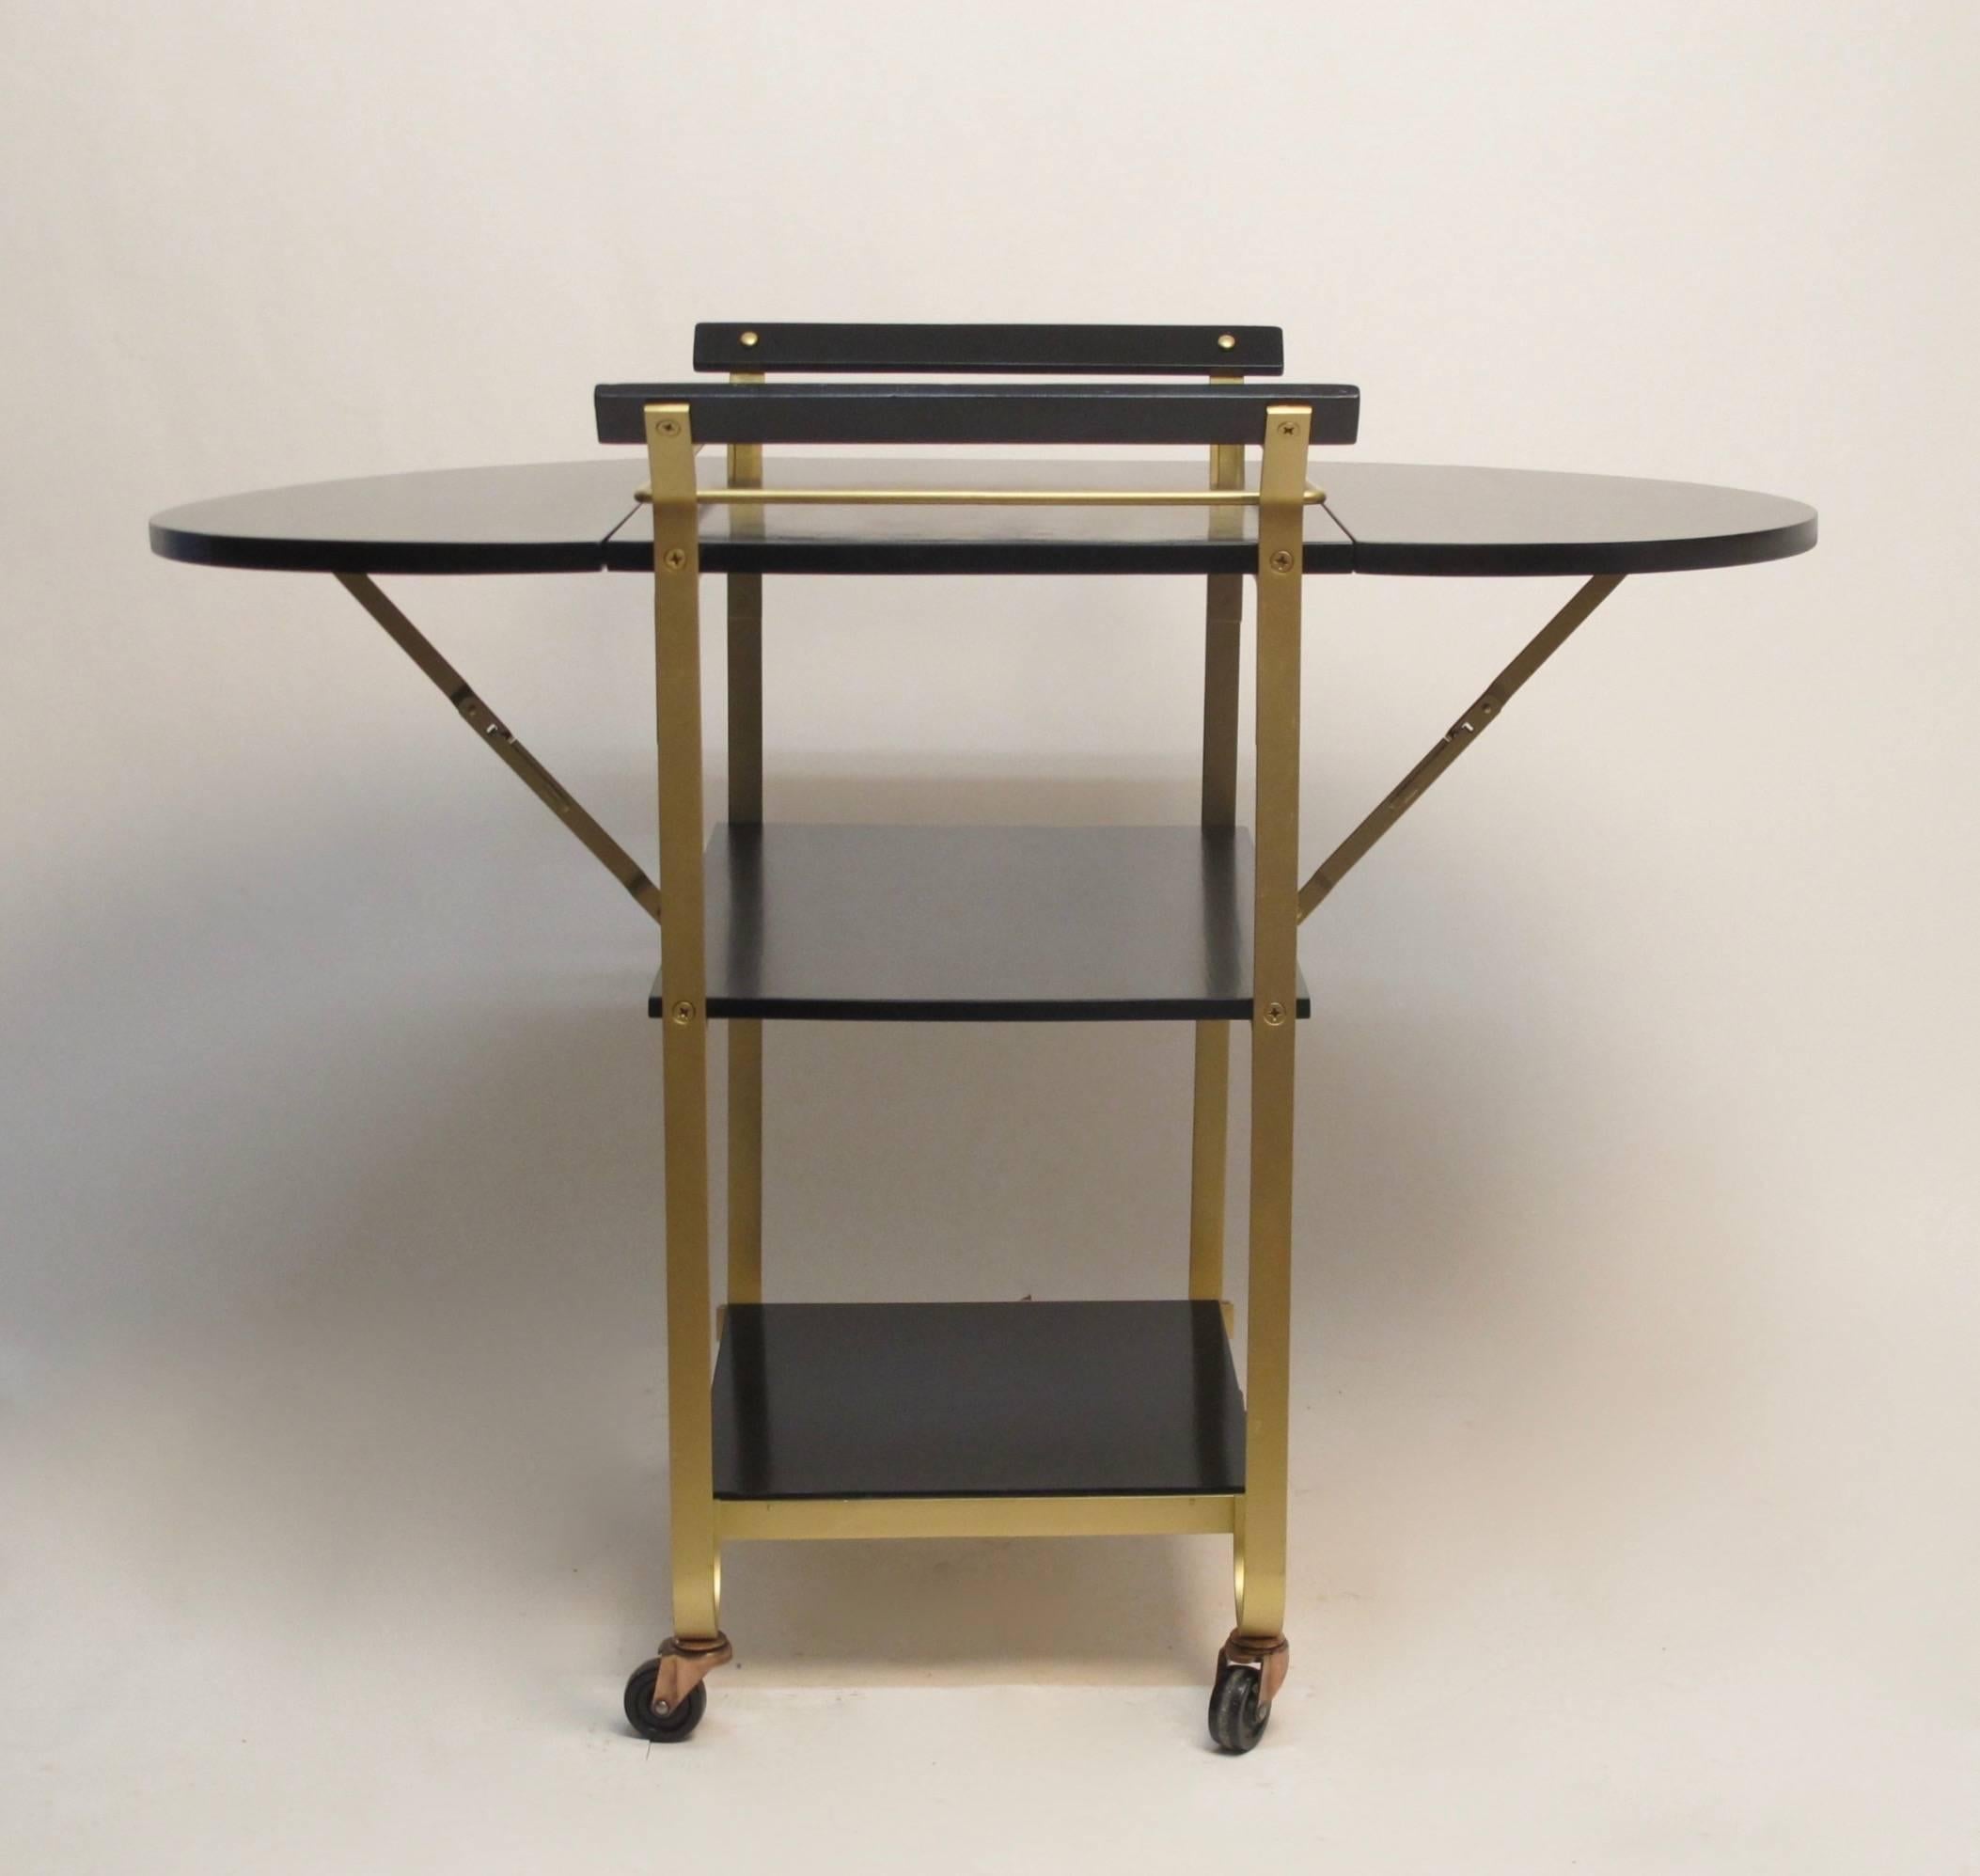 Black lacquered wood and satin brass three-tier bar cart with drop leaves. Each leaf measures 12.25 inches. Completely refurbished and polished. American, mid 20th century.